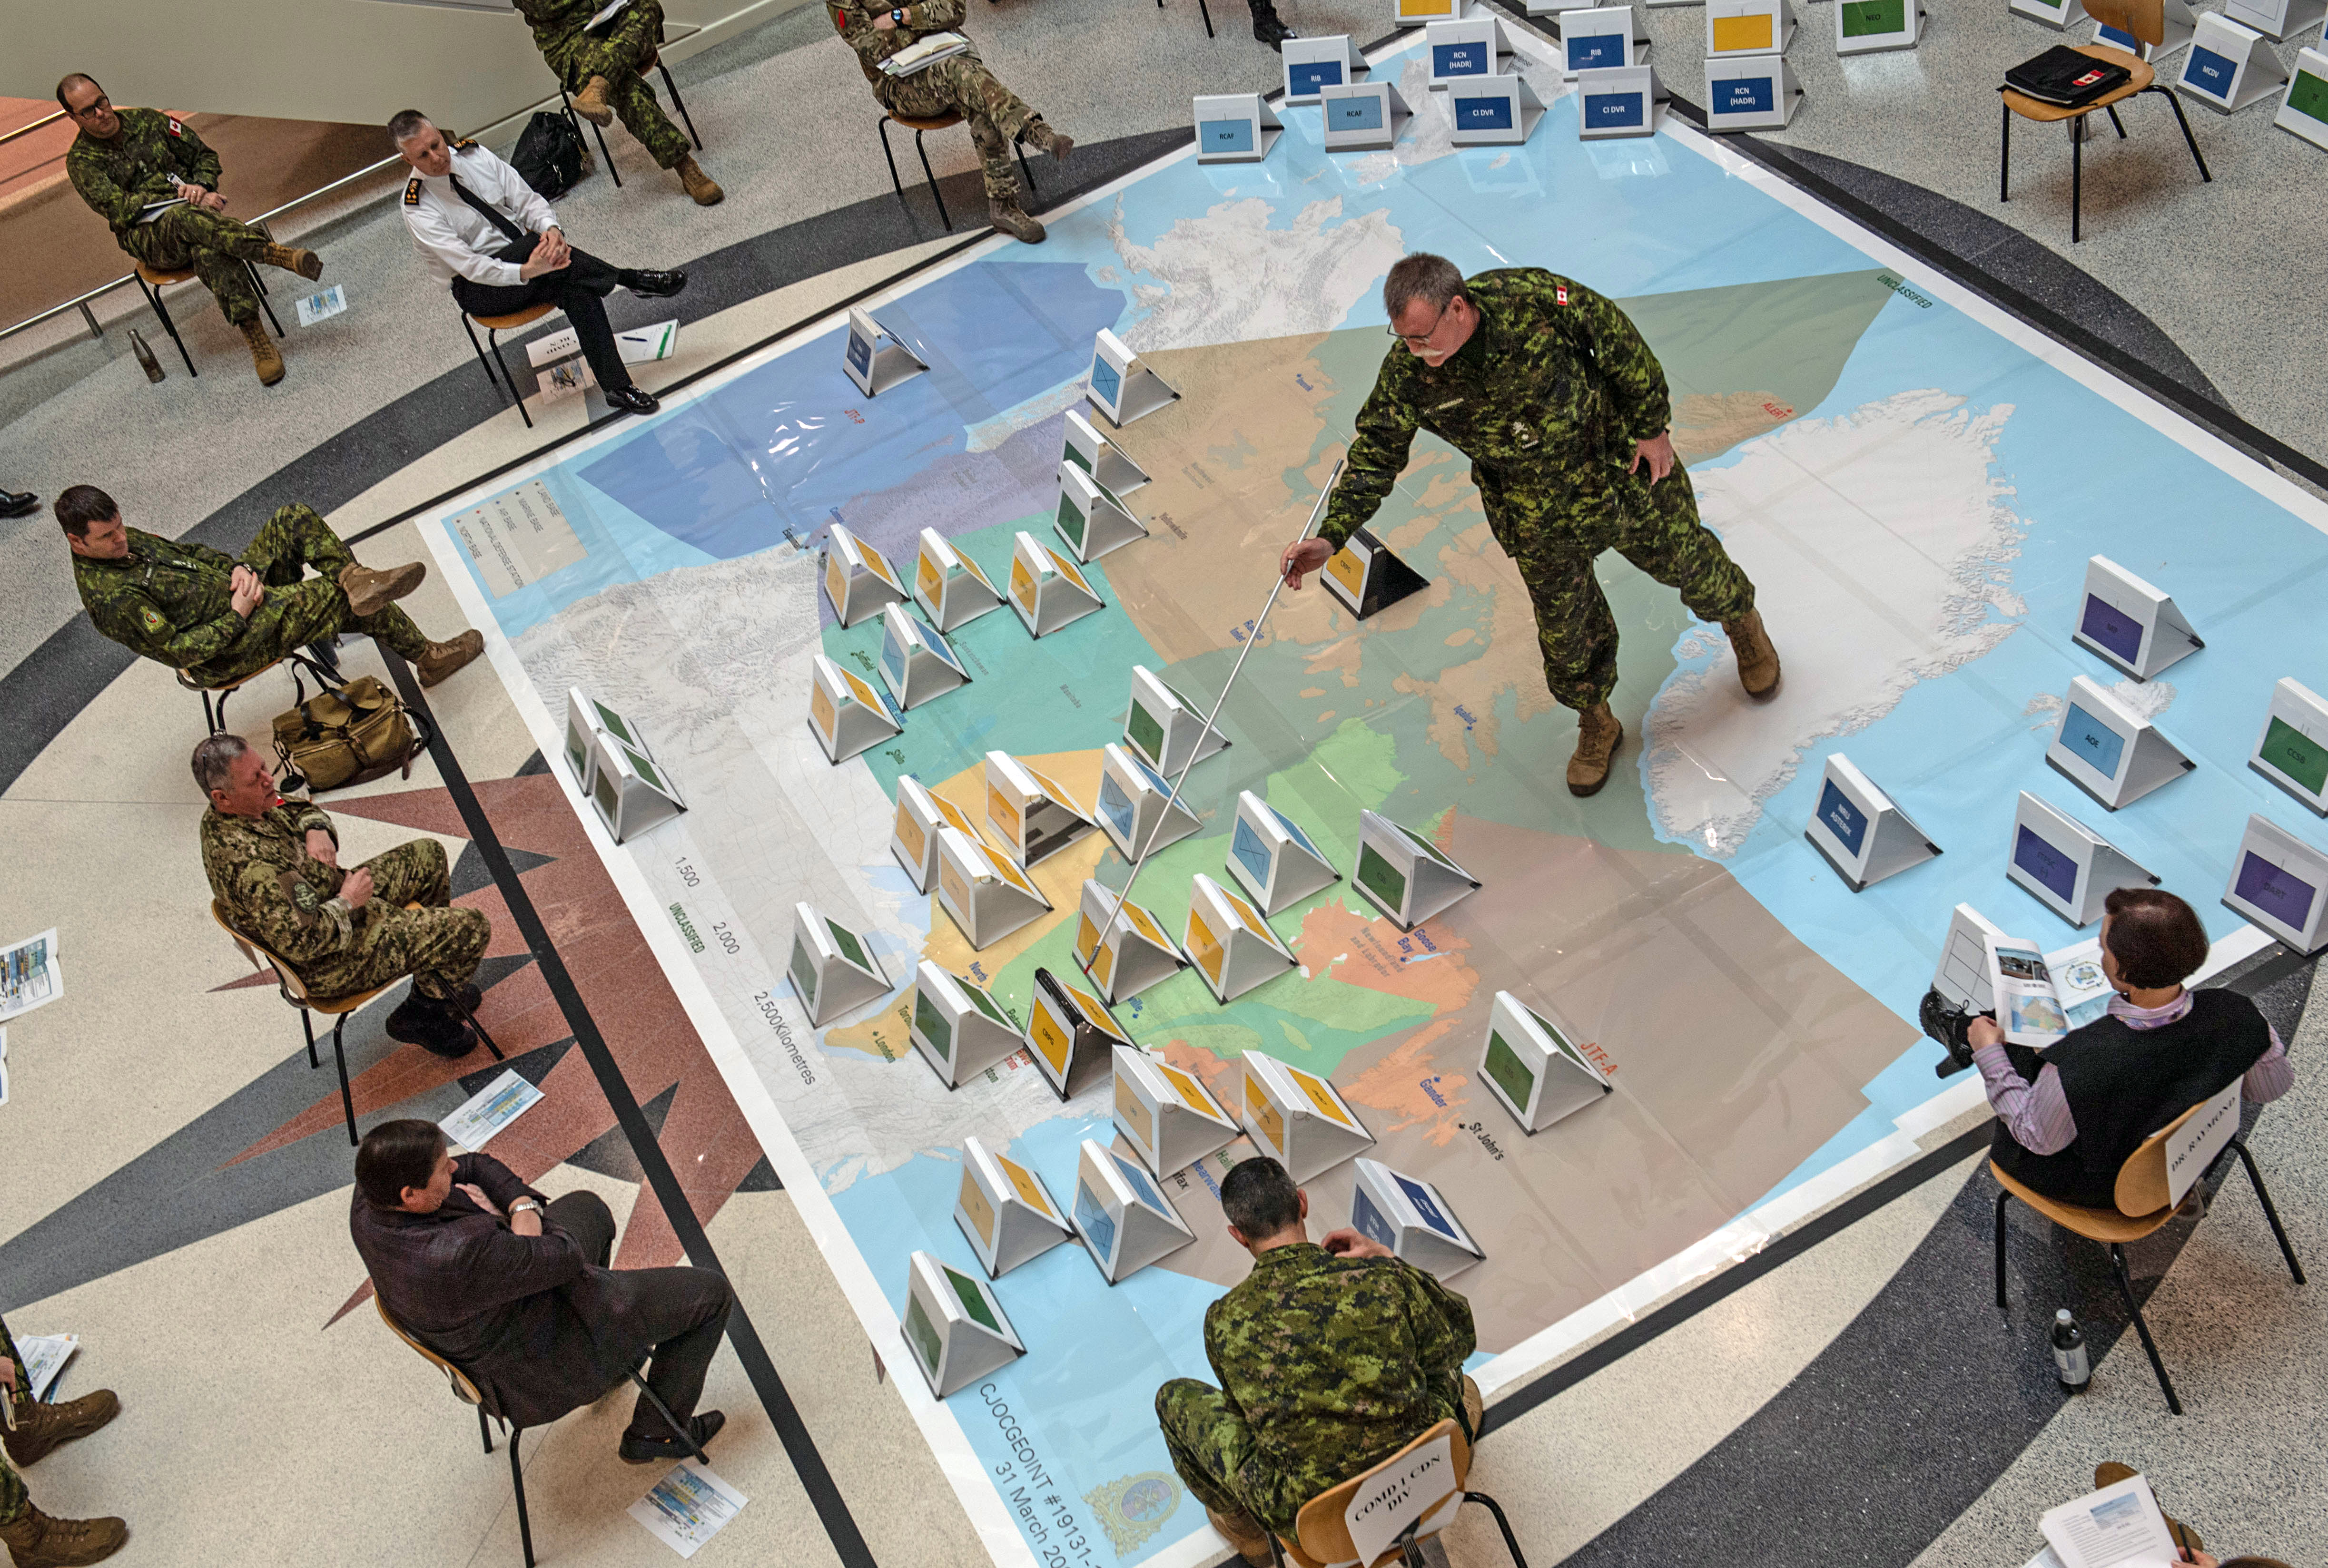 
Brigadier-General Dave Anderson from the Canadian Joint Operations Command (CJOC) presents during the Rehearsal of Concept (ROC) drill on April 3, 2020 in preparation to deploy Canadian Armed Forces (CAF) personnel under Operation LASER in response to COVID-19.